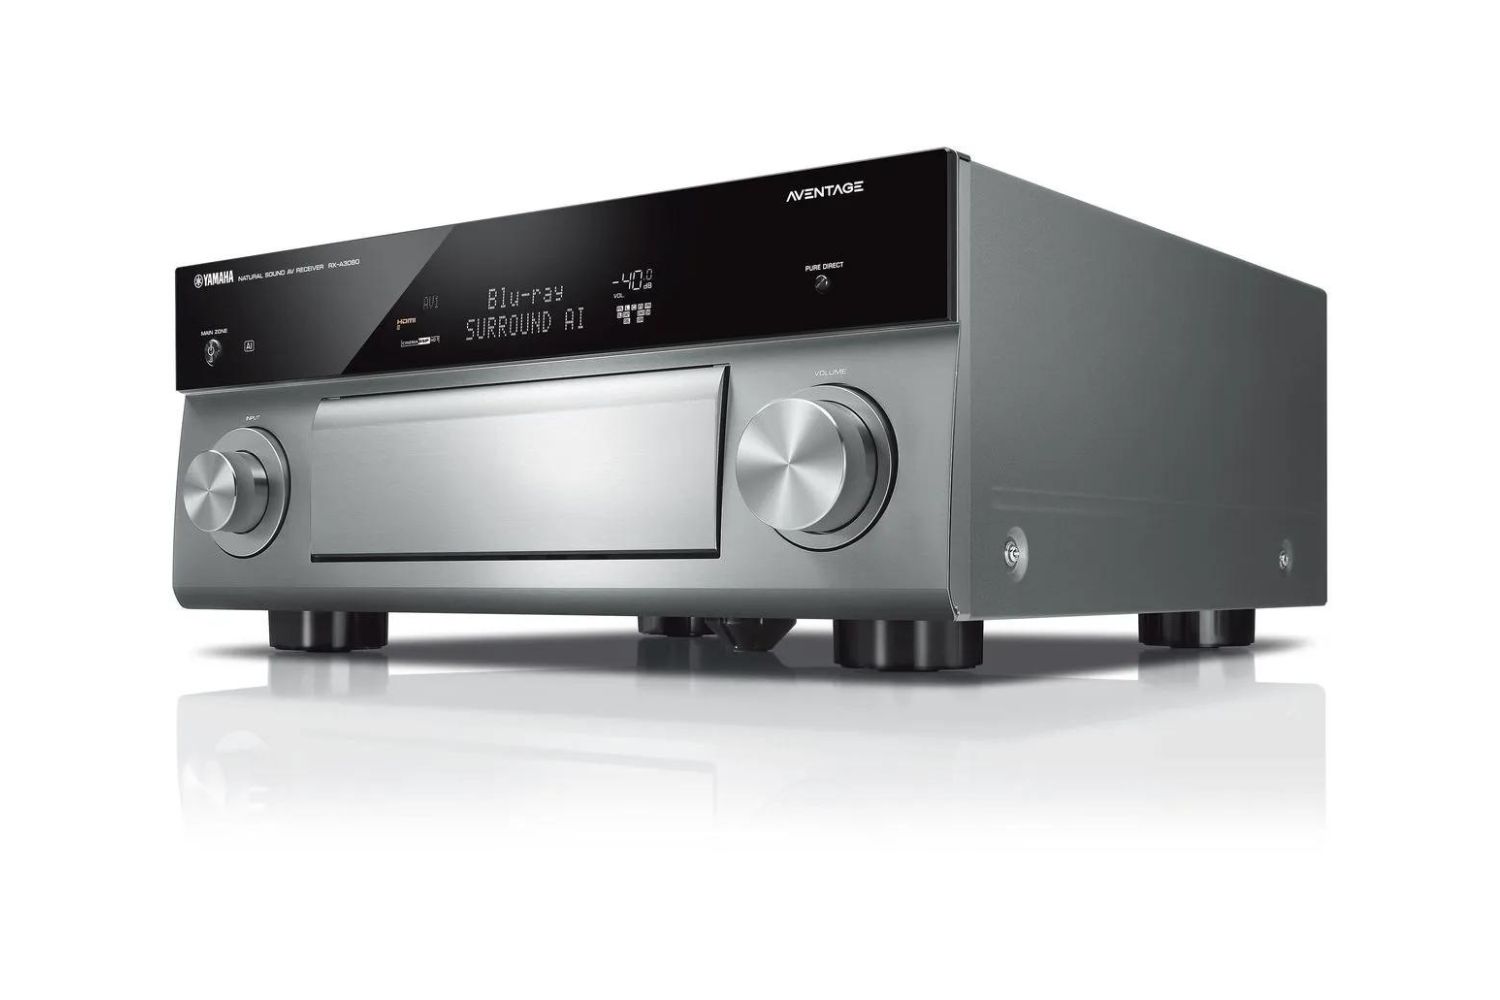 How To Give An AV Receiver More Zones